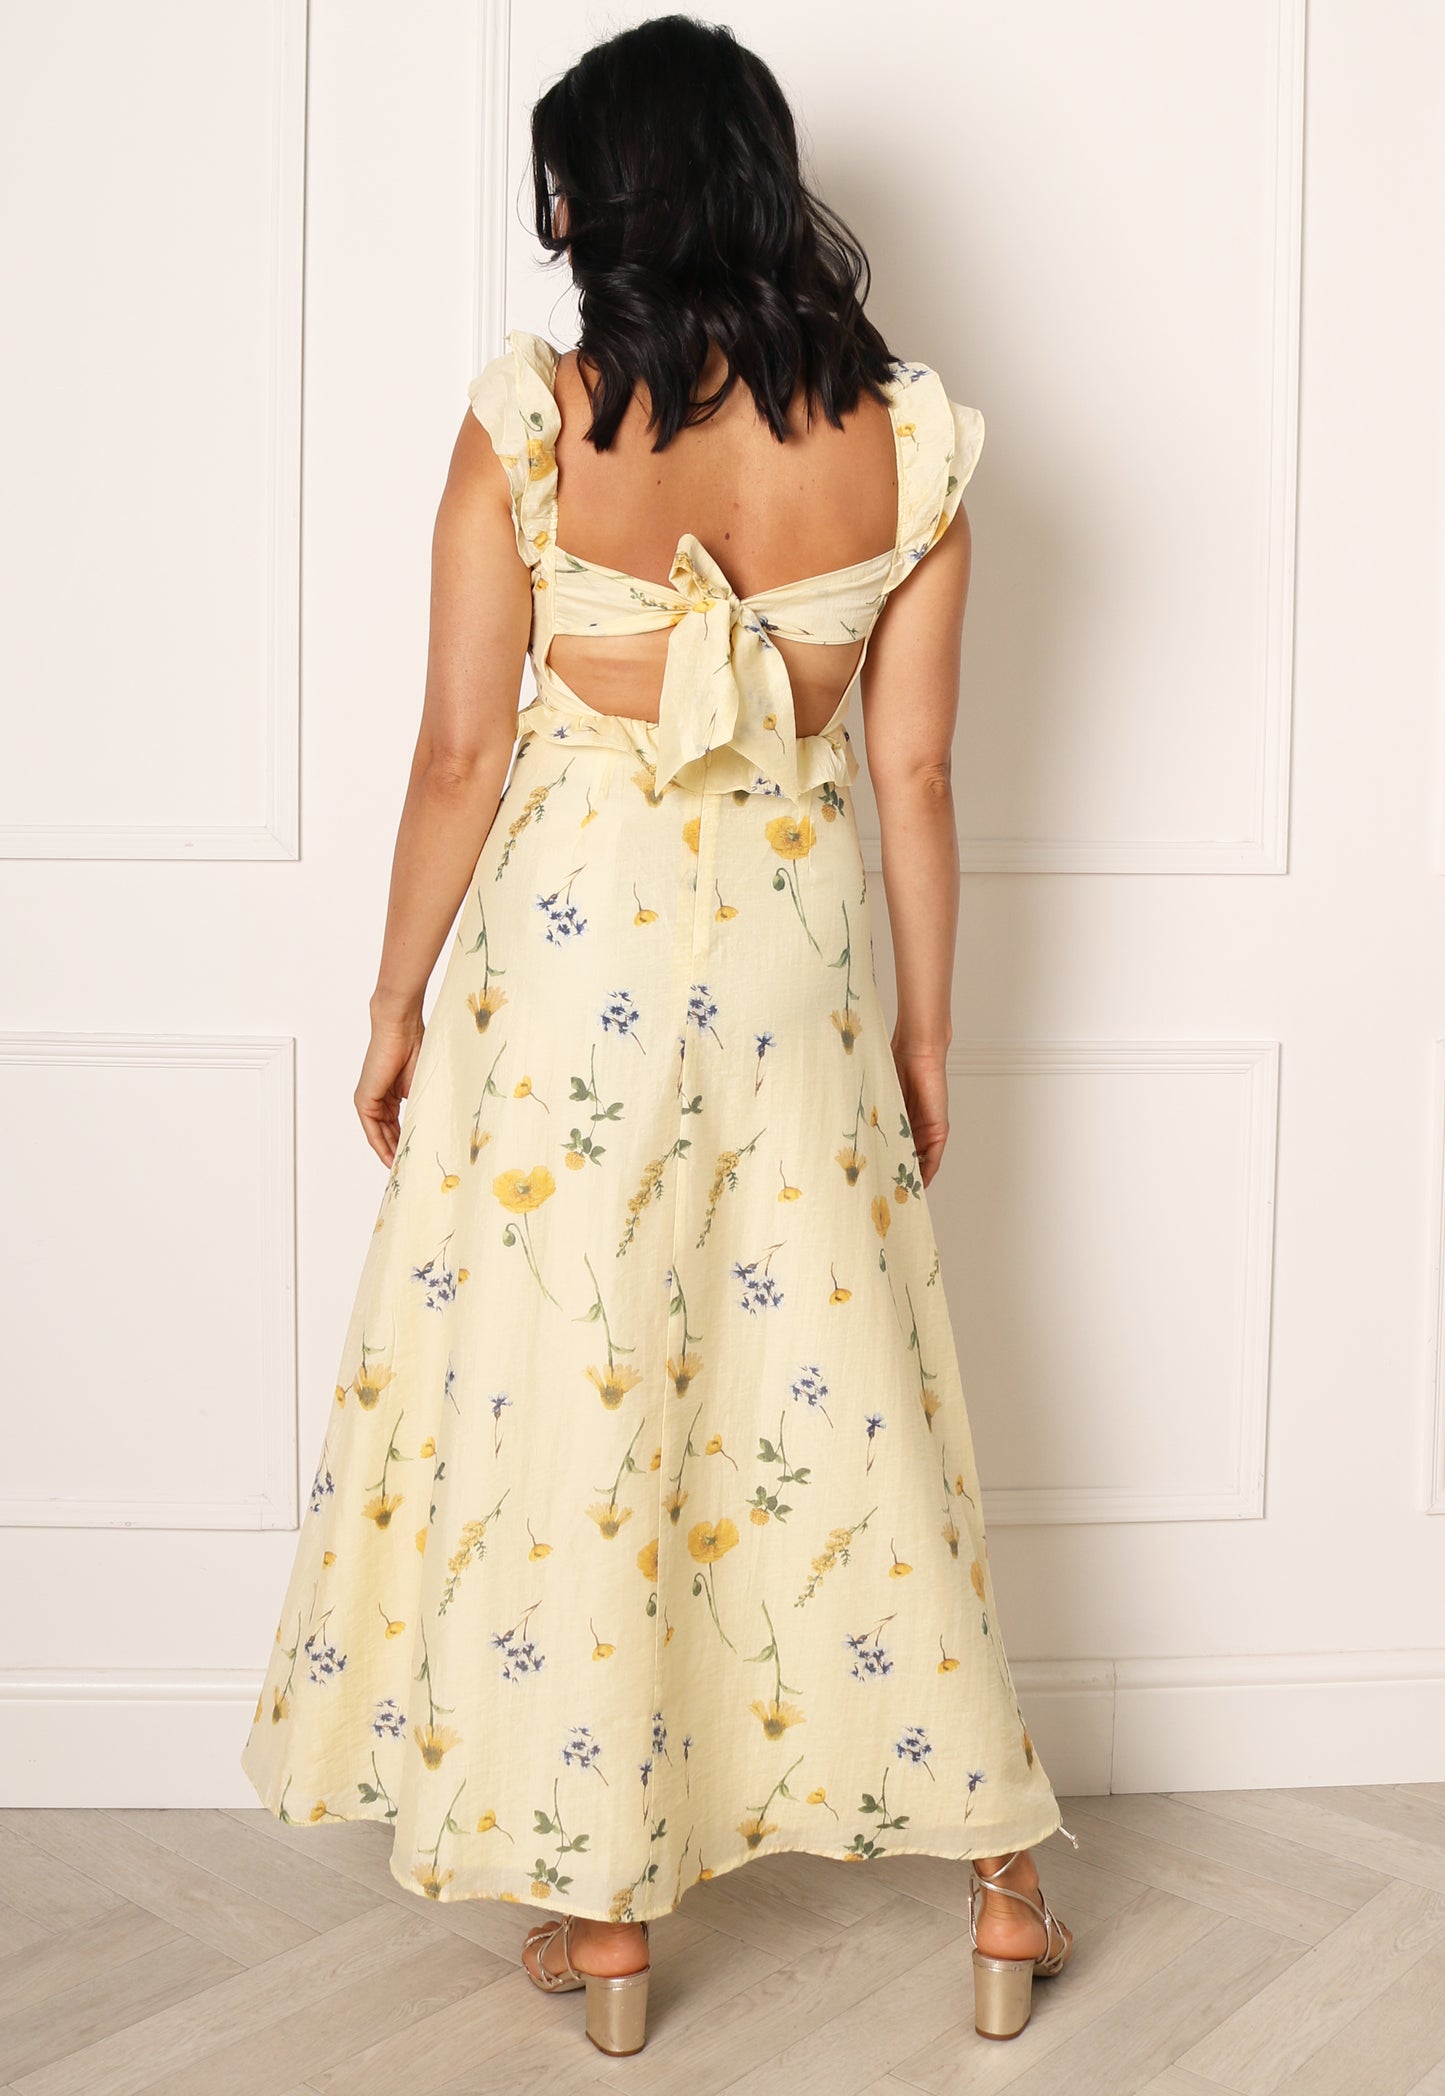 VERO MODA Adeline Backless Floral Frill Detail Midi Dress in Lemon Yellow - One Nation Clothing